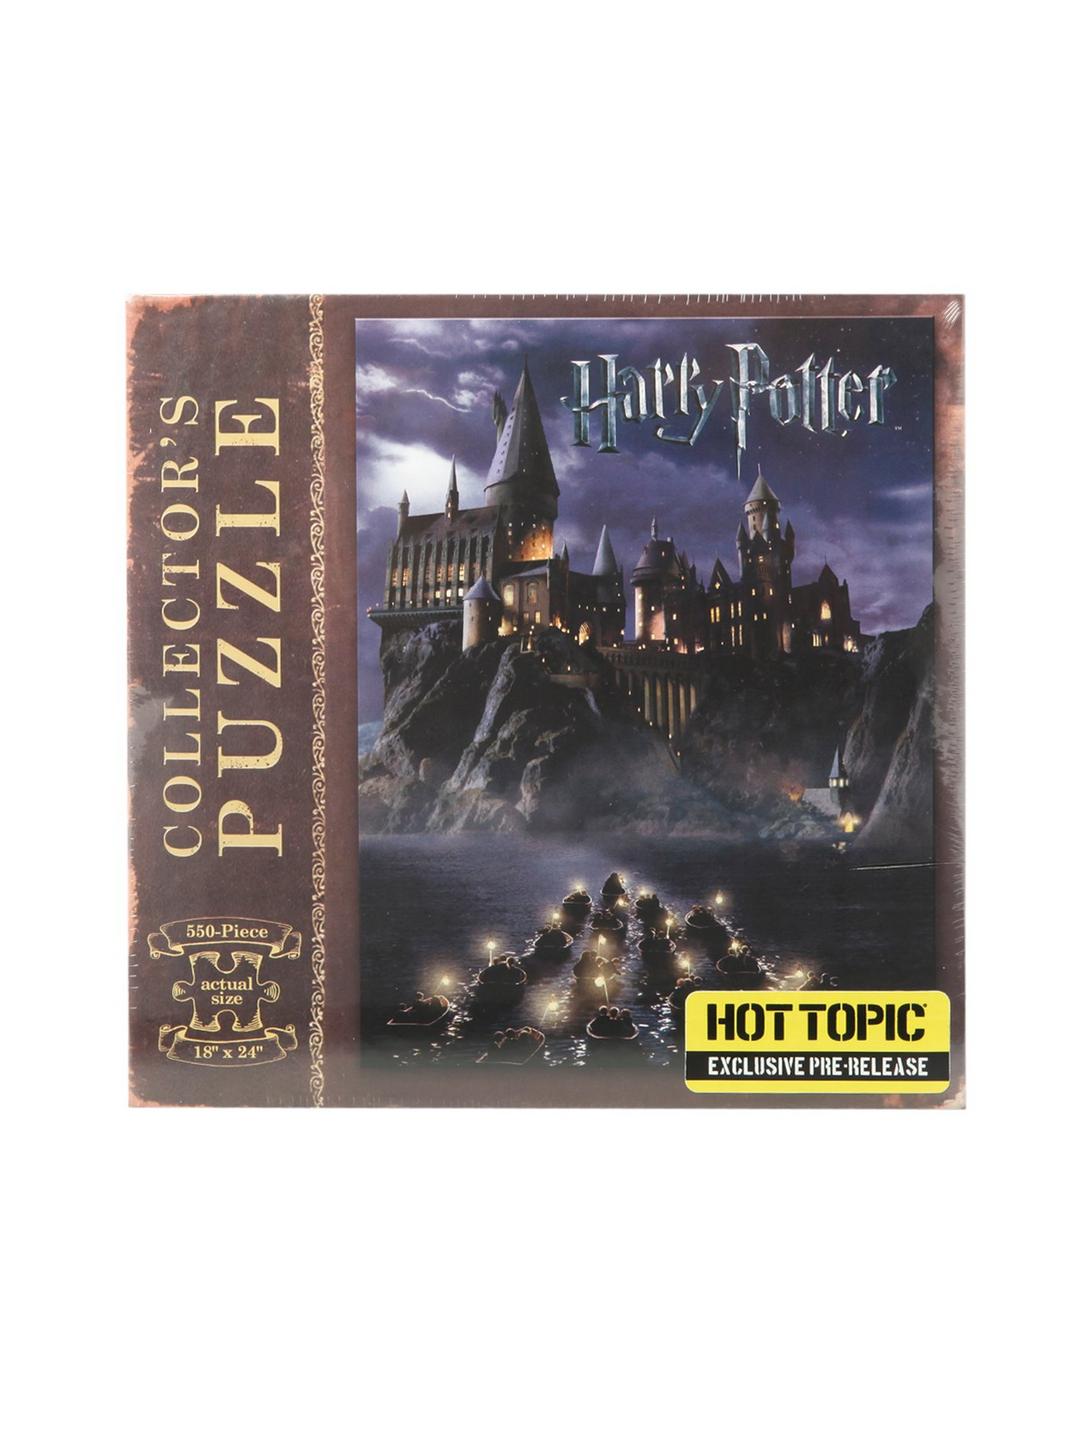 Harry Potter Hogwarts 550 Piece Collector's Puzzle Hot Topic Exclusive Pre-Release, , hi-res